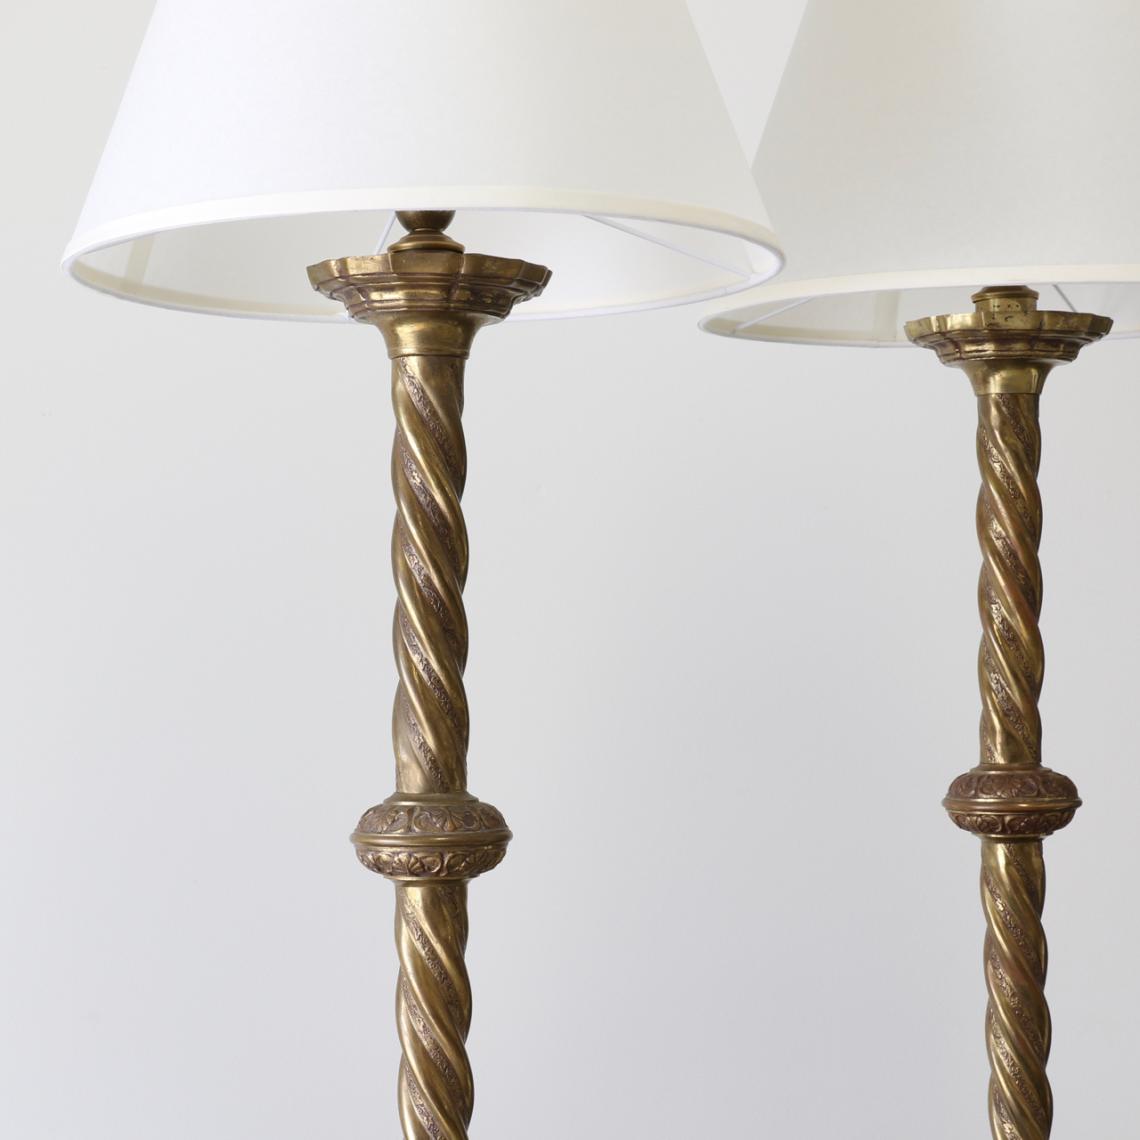 Pair of Baroque Style Brass Lamp Stands